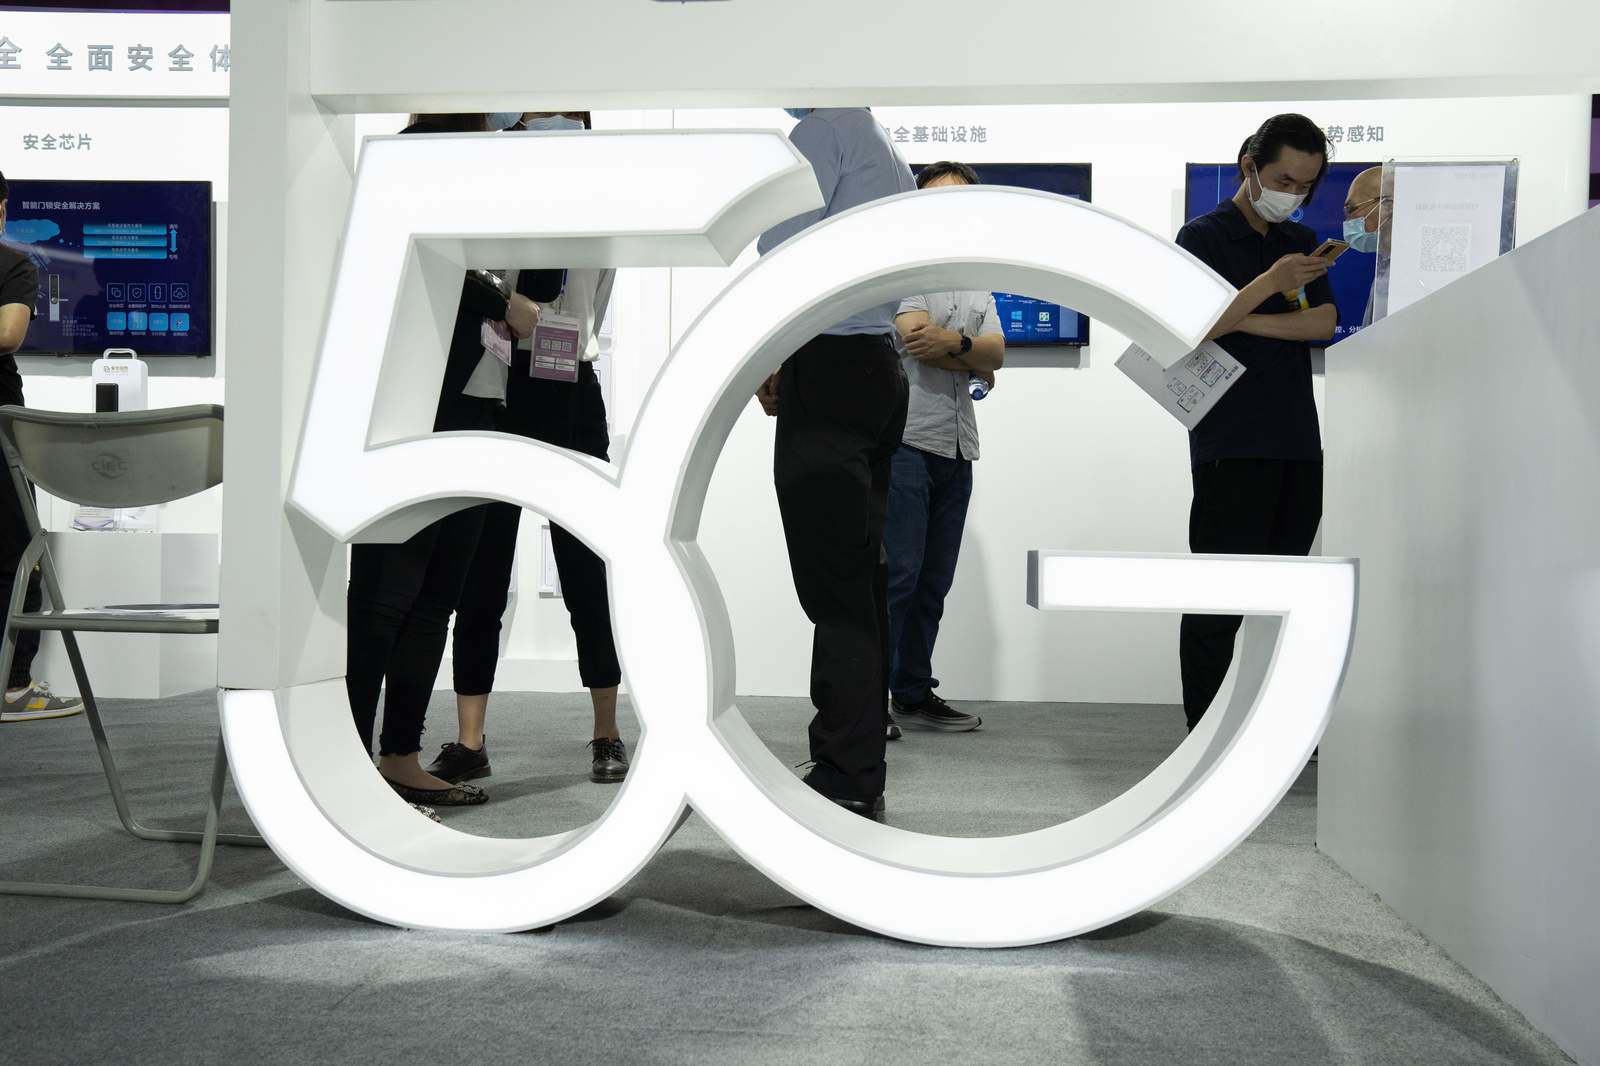 EXPLAINED: The promise of 5G wireless - speed, hype, risk